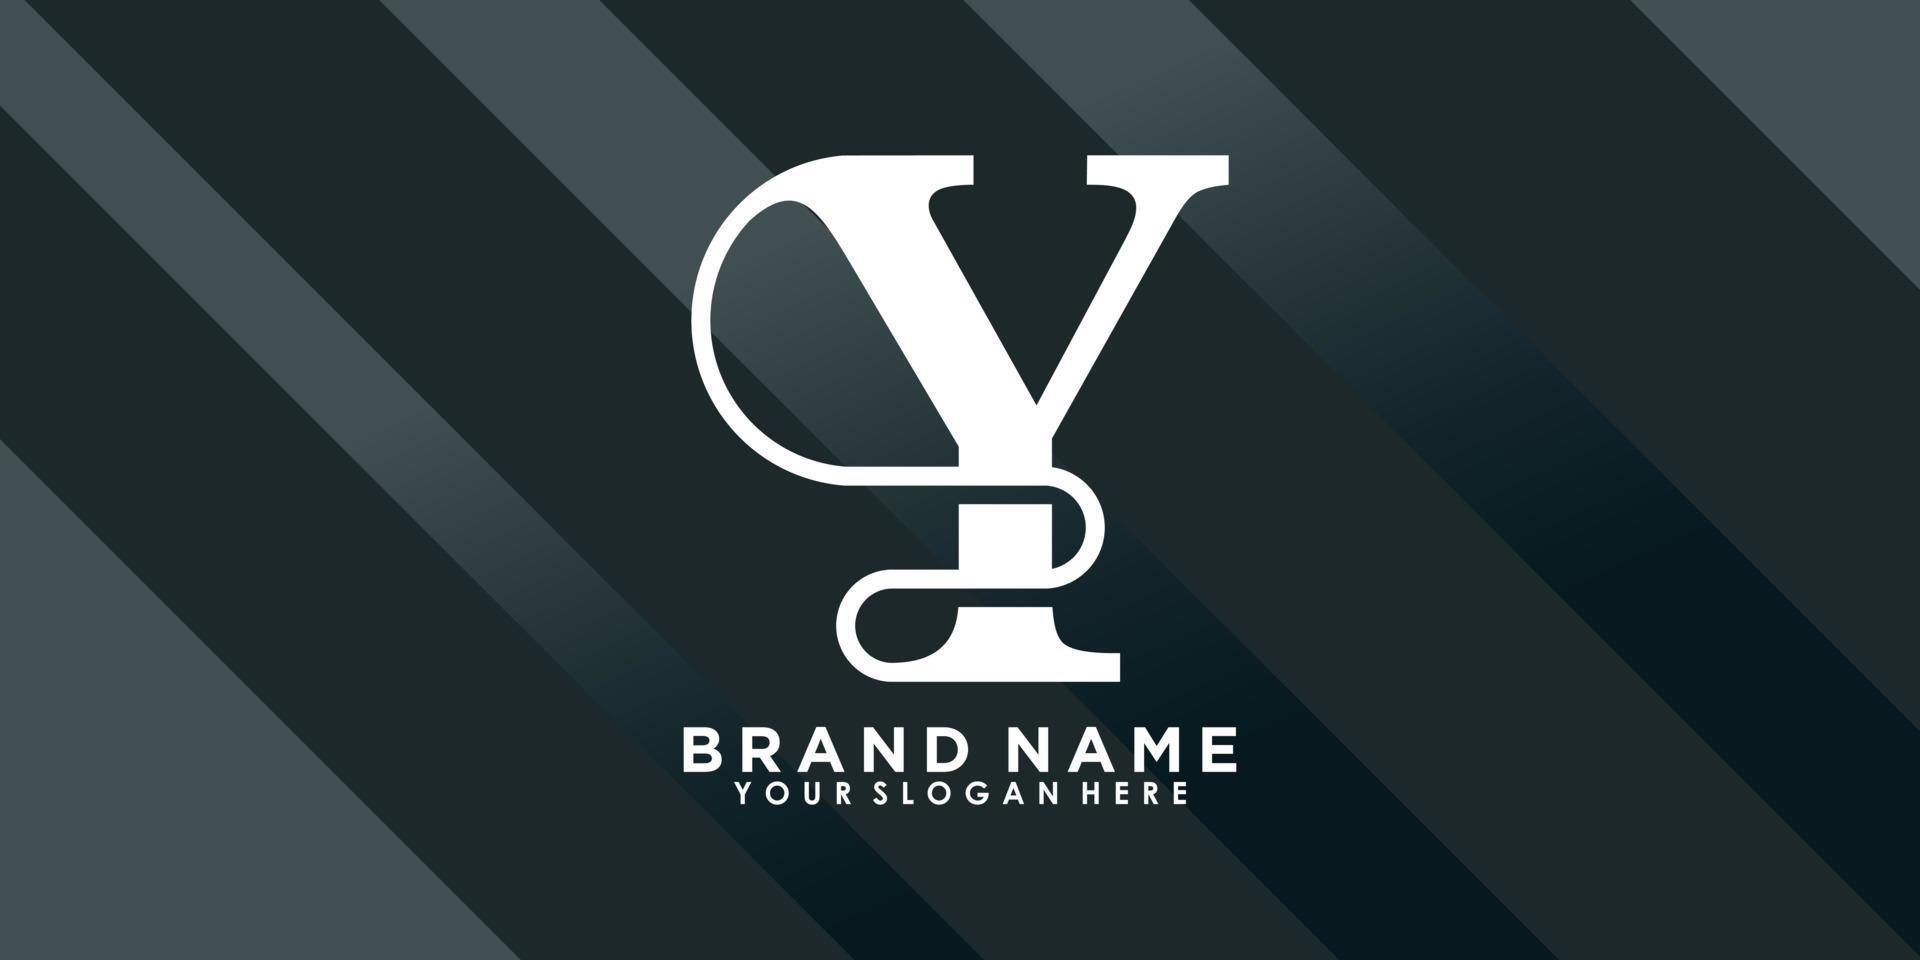 brand name logo design with letter Y creative concept vector